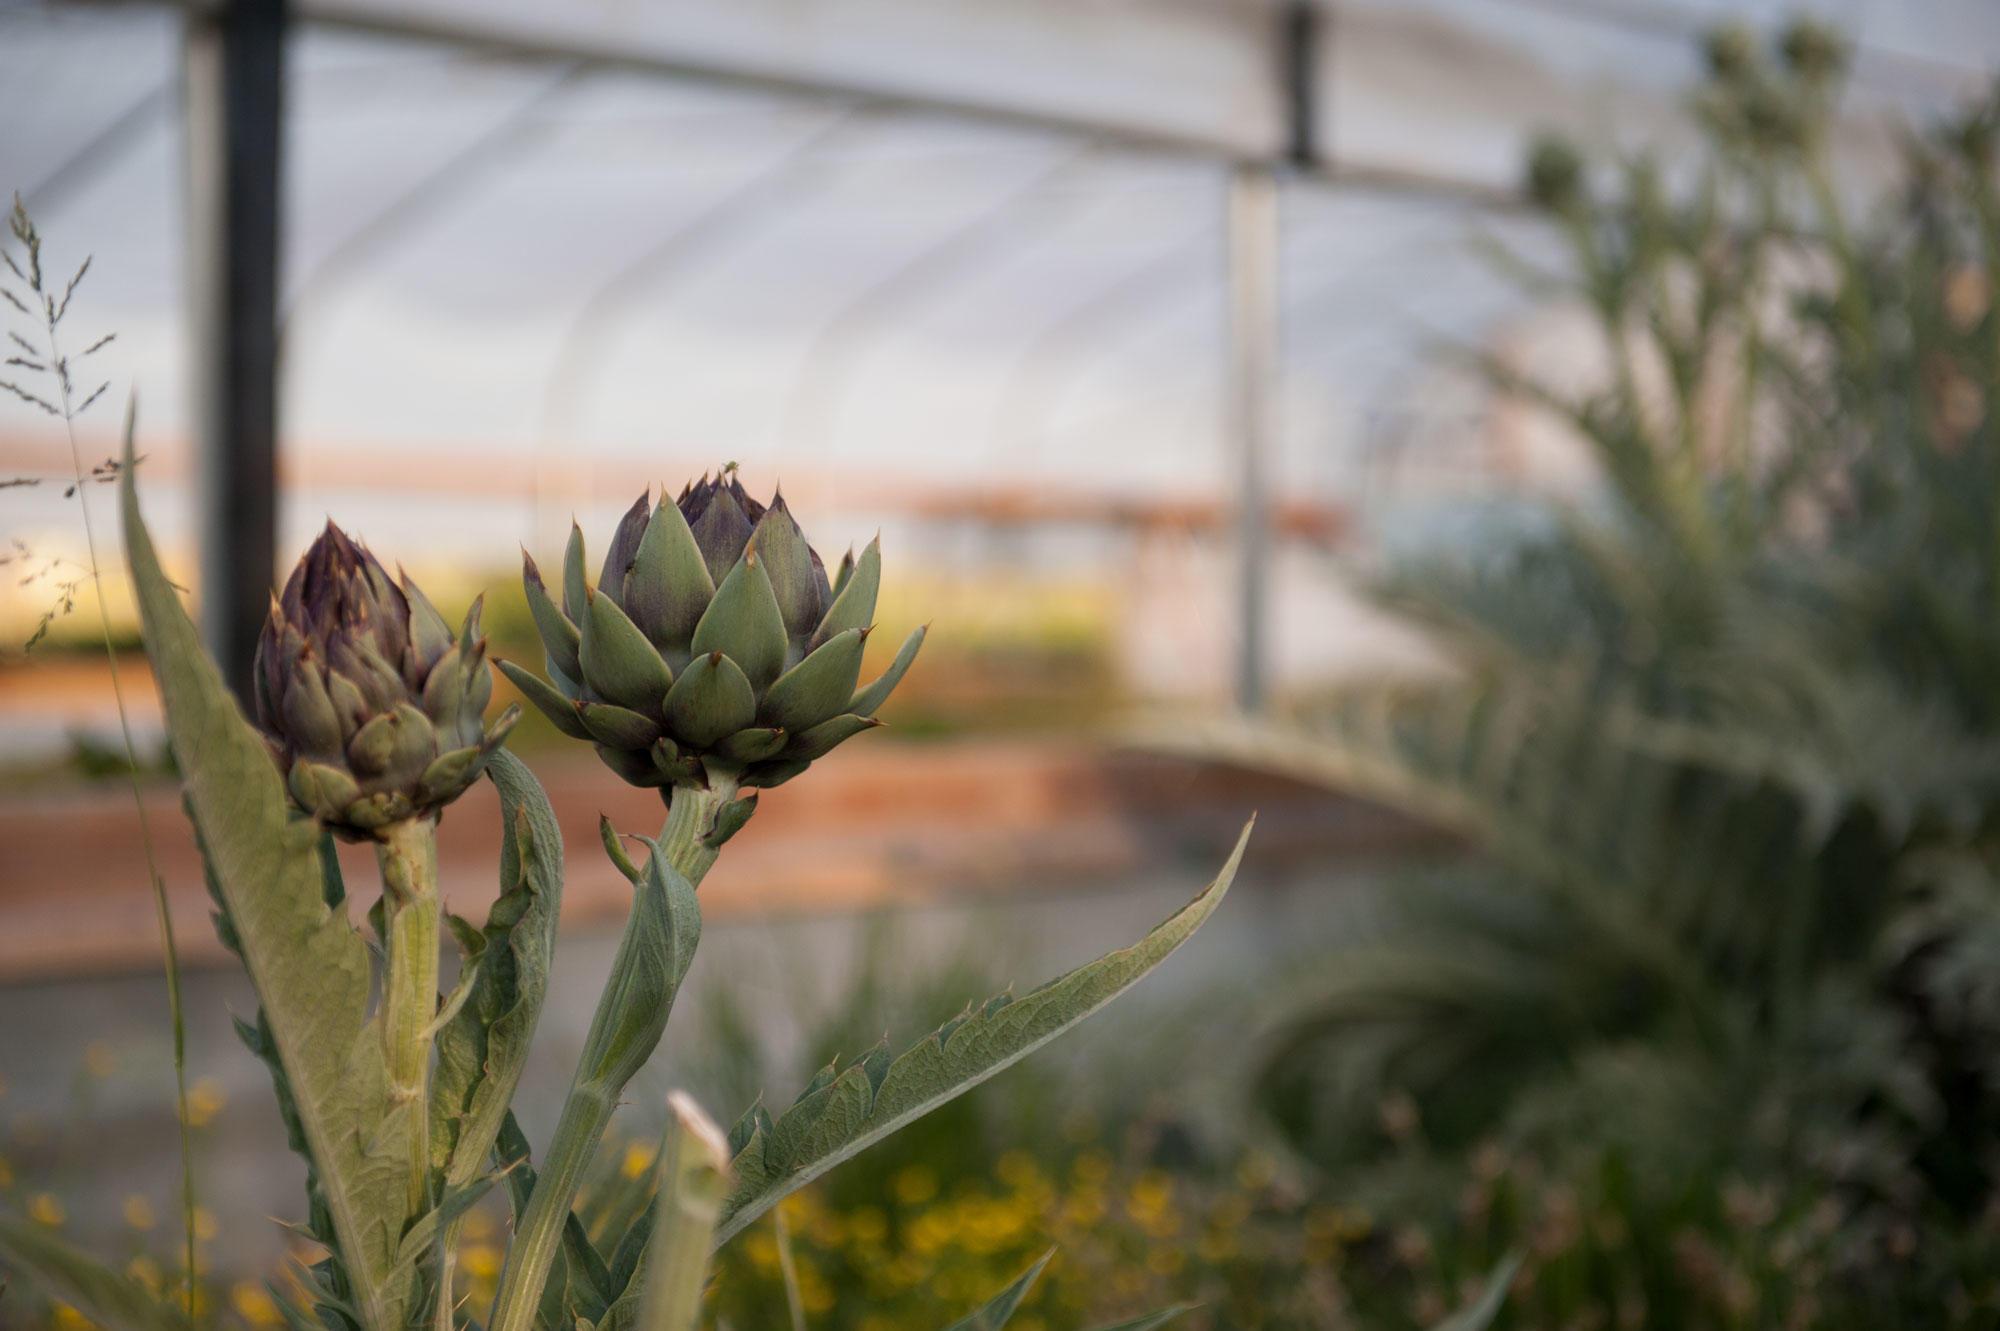 By mid-summer, the artichoke plant should send up flower buds, which are the part of the plant that we eat.